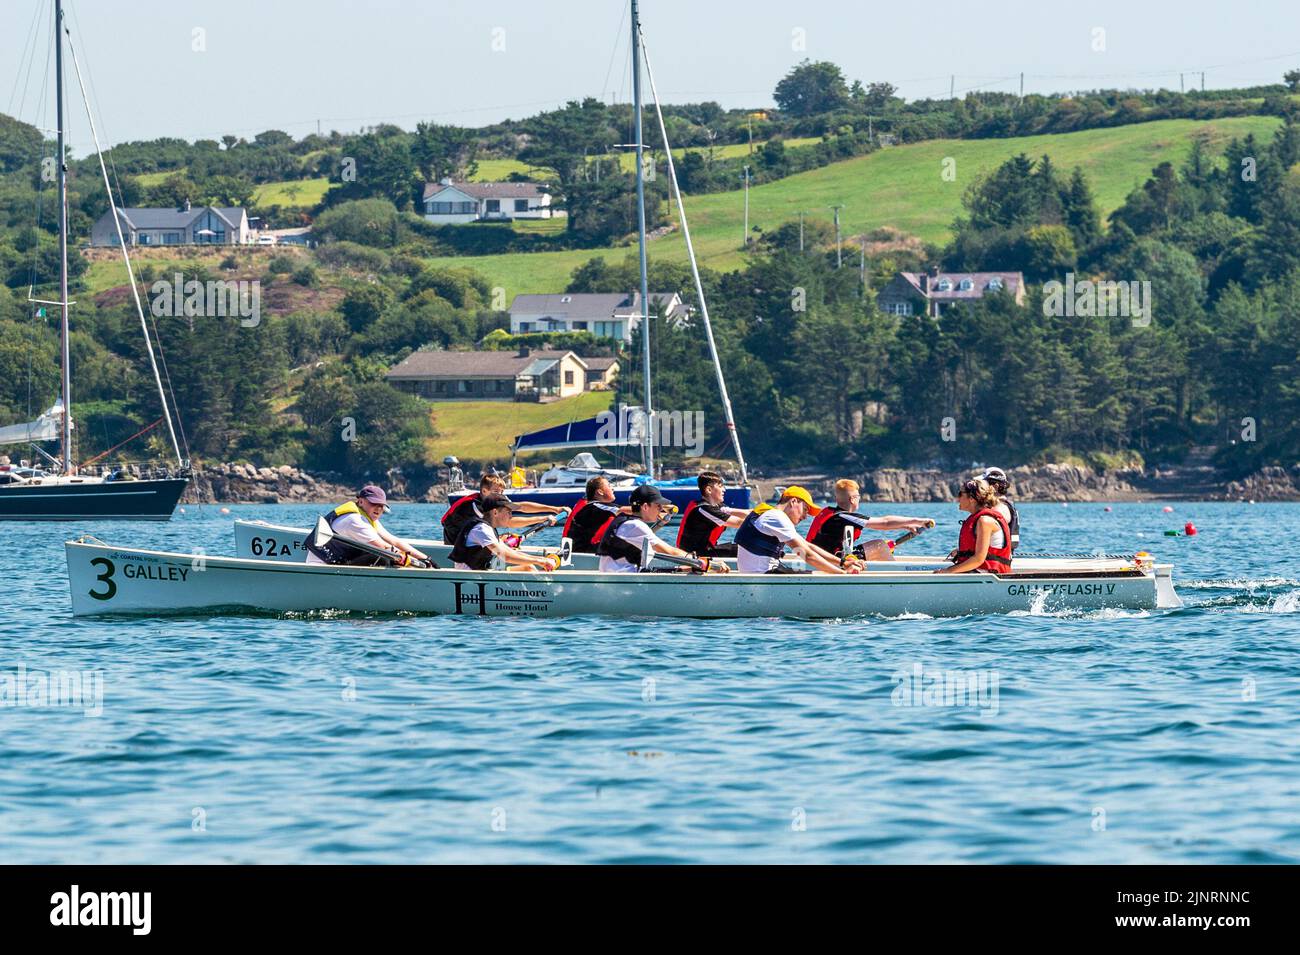 Schull, West Cork, Ireland. 13th Aug, 2022. The 2022 Irish Coastal Rowing Championships is taking place this weekend in Schull, West Cork. A total of 290 crews from different clubs are taking part in the event which finishes Sunday evening. Credit: AG News/Alamy Live News Stock Photo